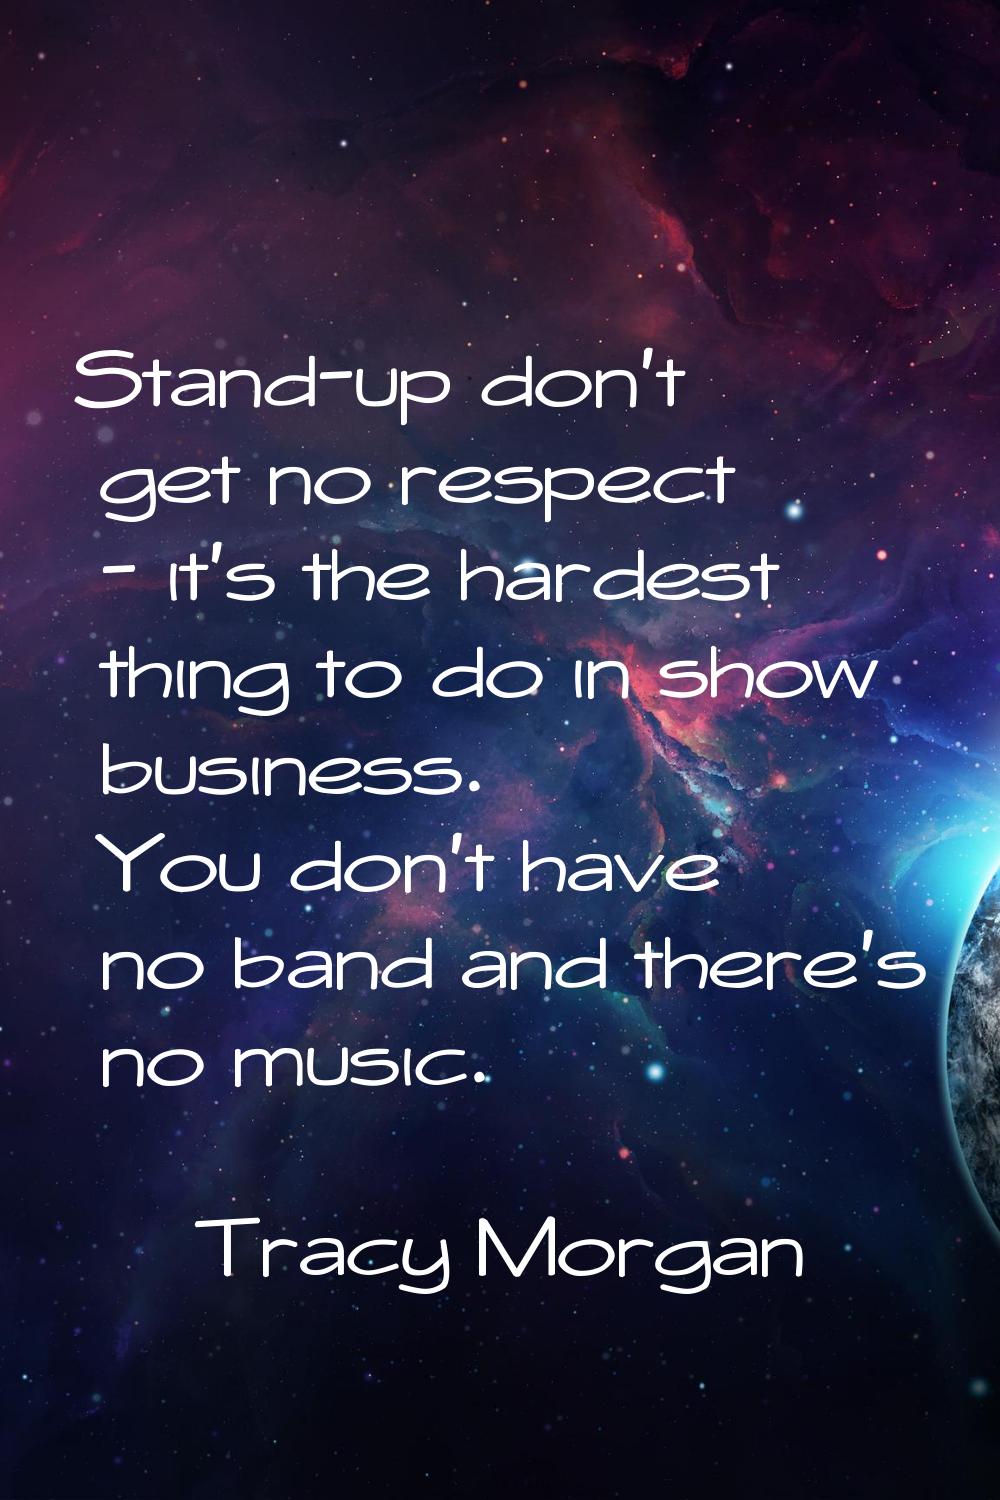 Stand-up don't get no respect - it's the hardest thing to do in show business. You don't have no ba